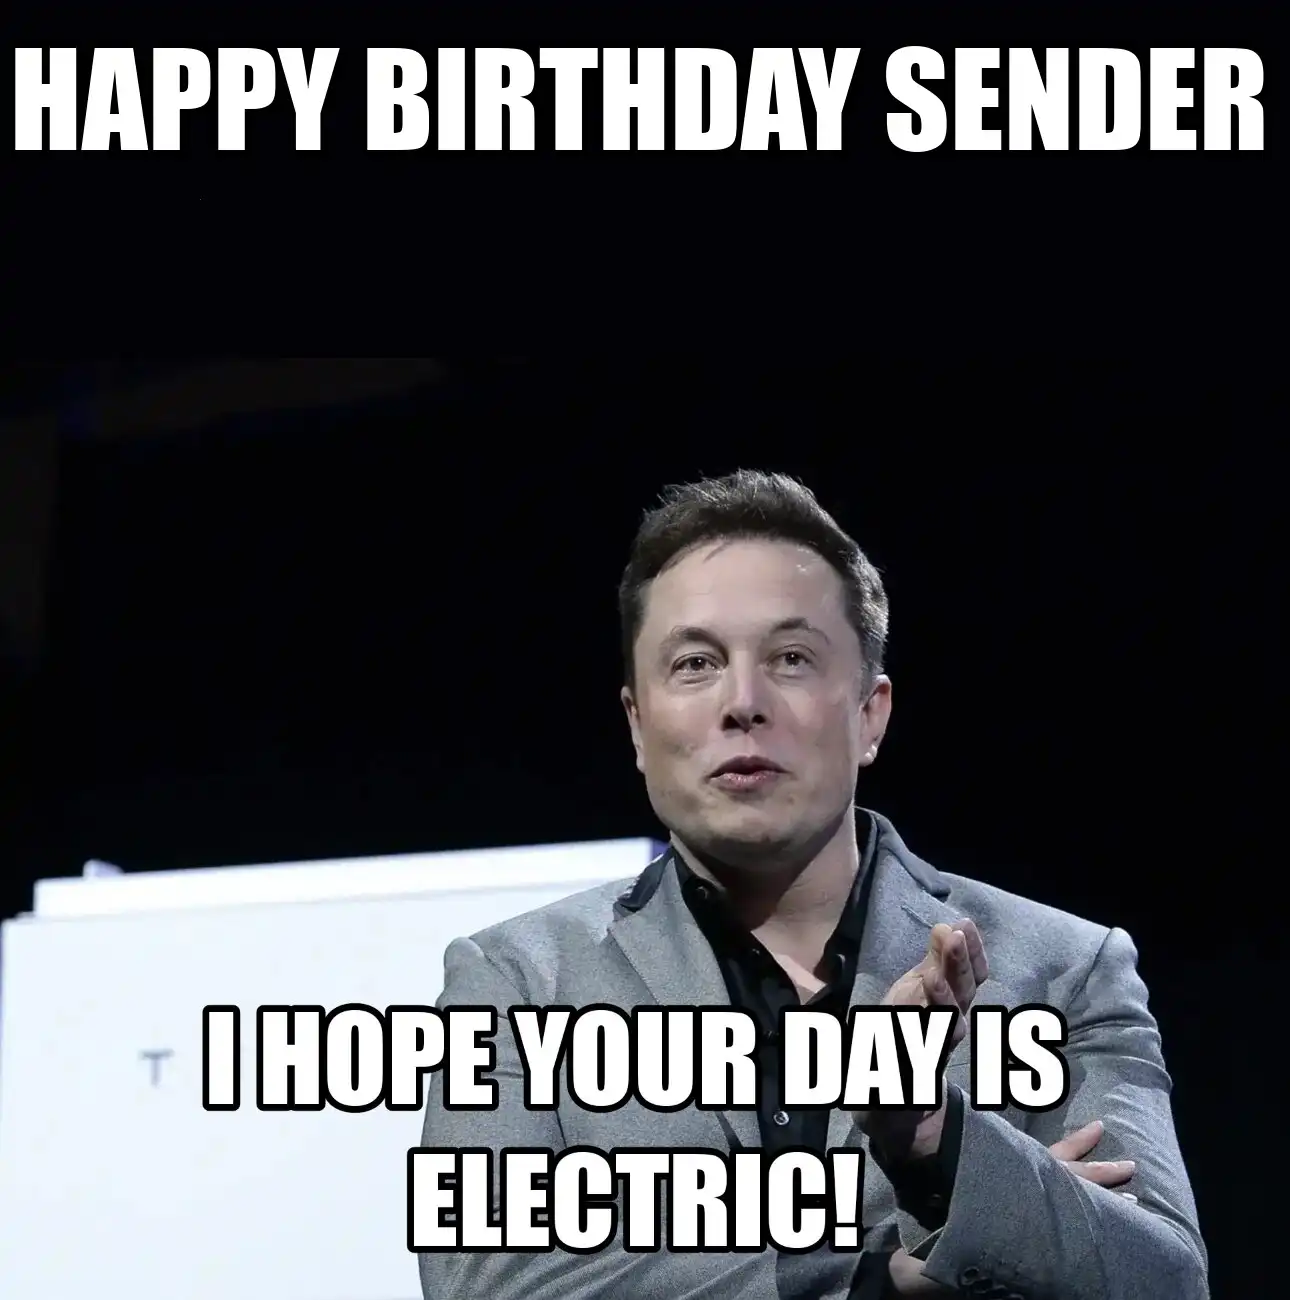 Happy Birthday Sender I Hope Your Day Is Electric Meme